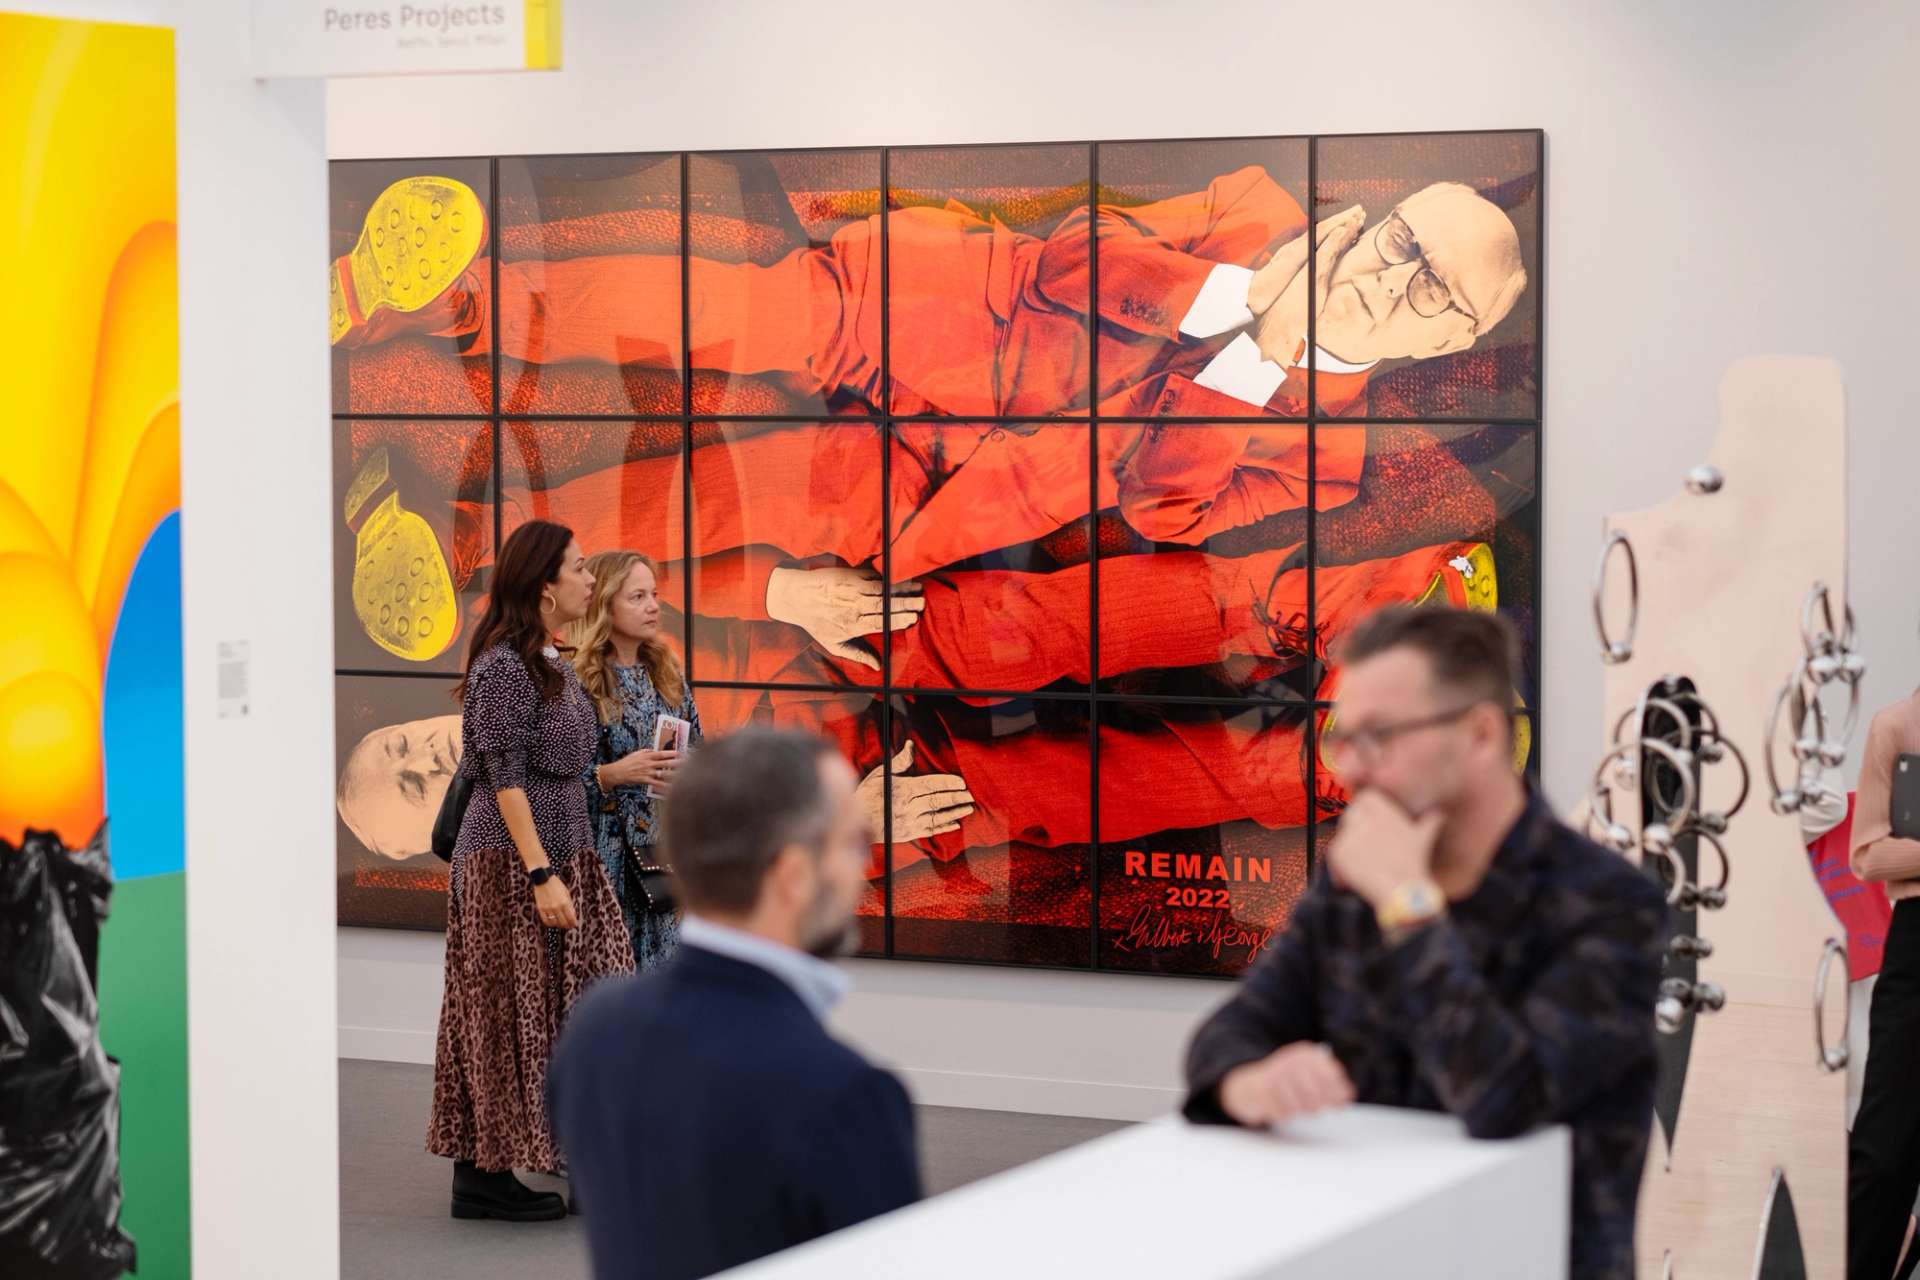 Photograph of a large-scale artwork by the duo artists George and George, displayed in the White Cube gallery booth at Frieze London Art Fair 2023.